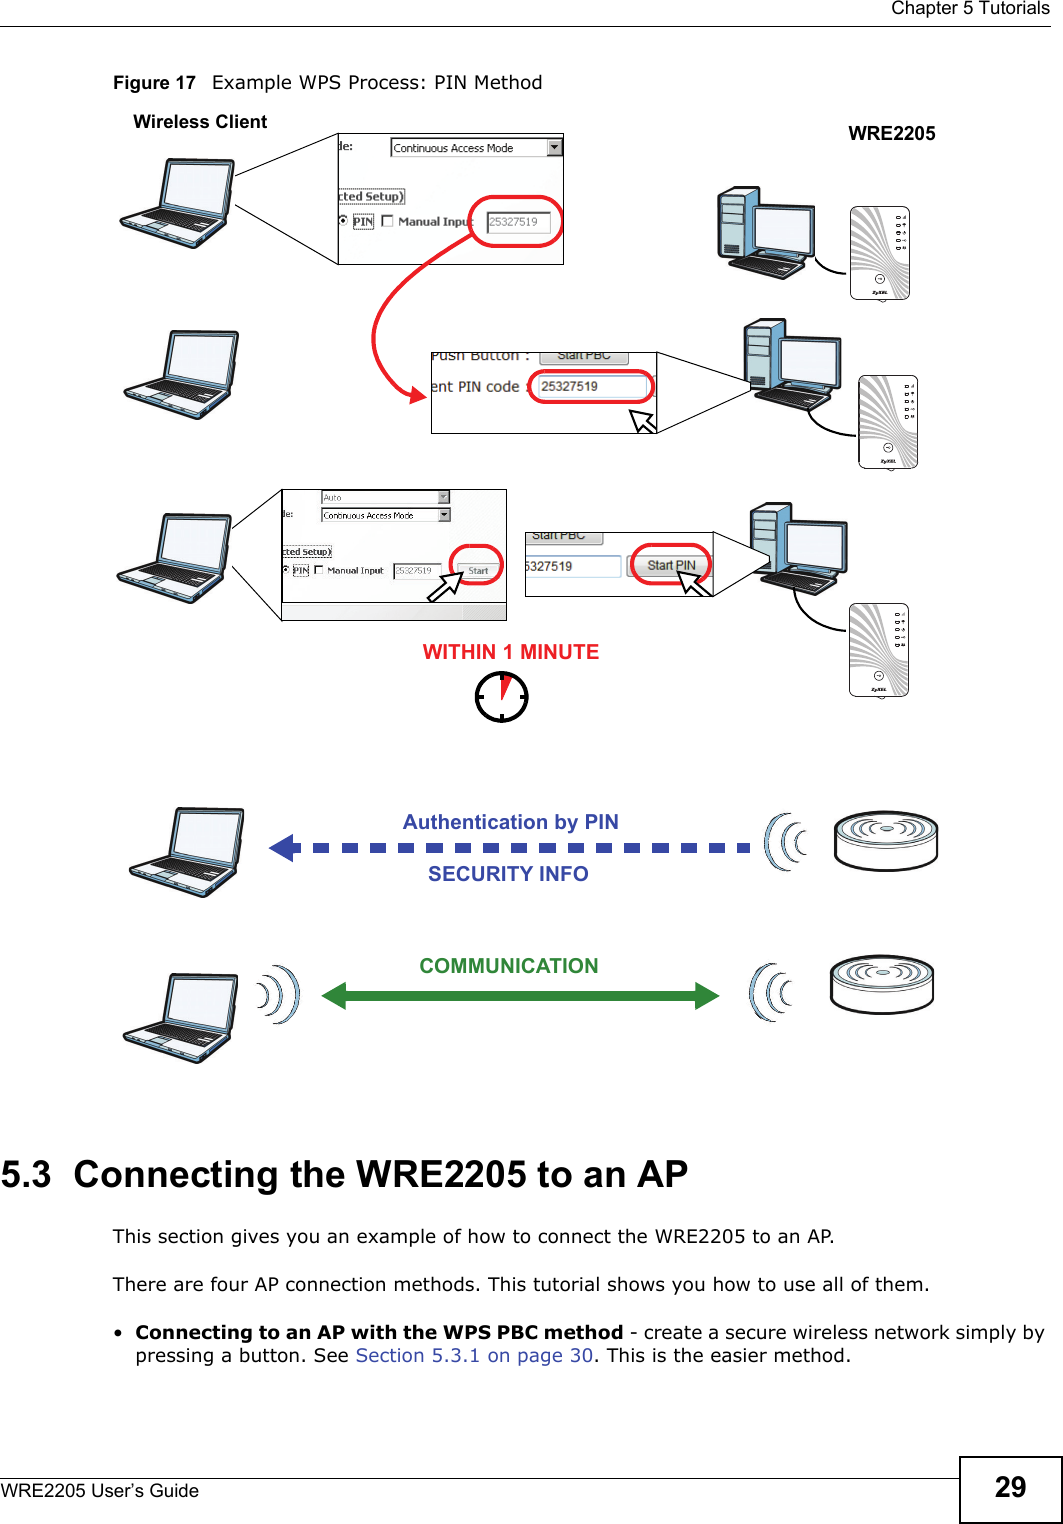  Chapter 5 TutorialsWRE2205 User’s Guide 29Figure 17   Example WPS Process: PIN Method5.3  Connecting the WRE2205 to an APThis section gives you an example of how to connect the WRE2205 to an AP.There are four AP connection methods. This tutorial shows you how to use all of them.•Connecting to an AP with the WPS PBC method - create a secure wireless network simply by pressing a button. See Section 5.3.1 on page 30. This is the easier method.Authentication by PINSECURITY INFOWITHIN 1 MINUTEWireless ClientWRE2205COMMUNICATION